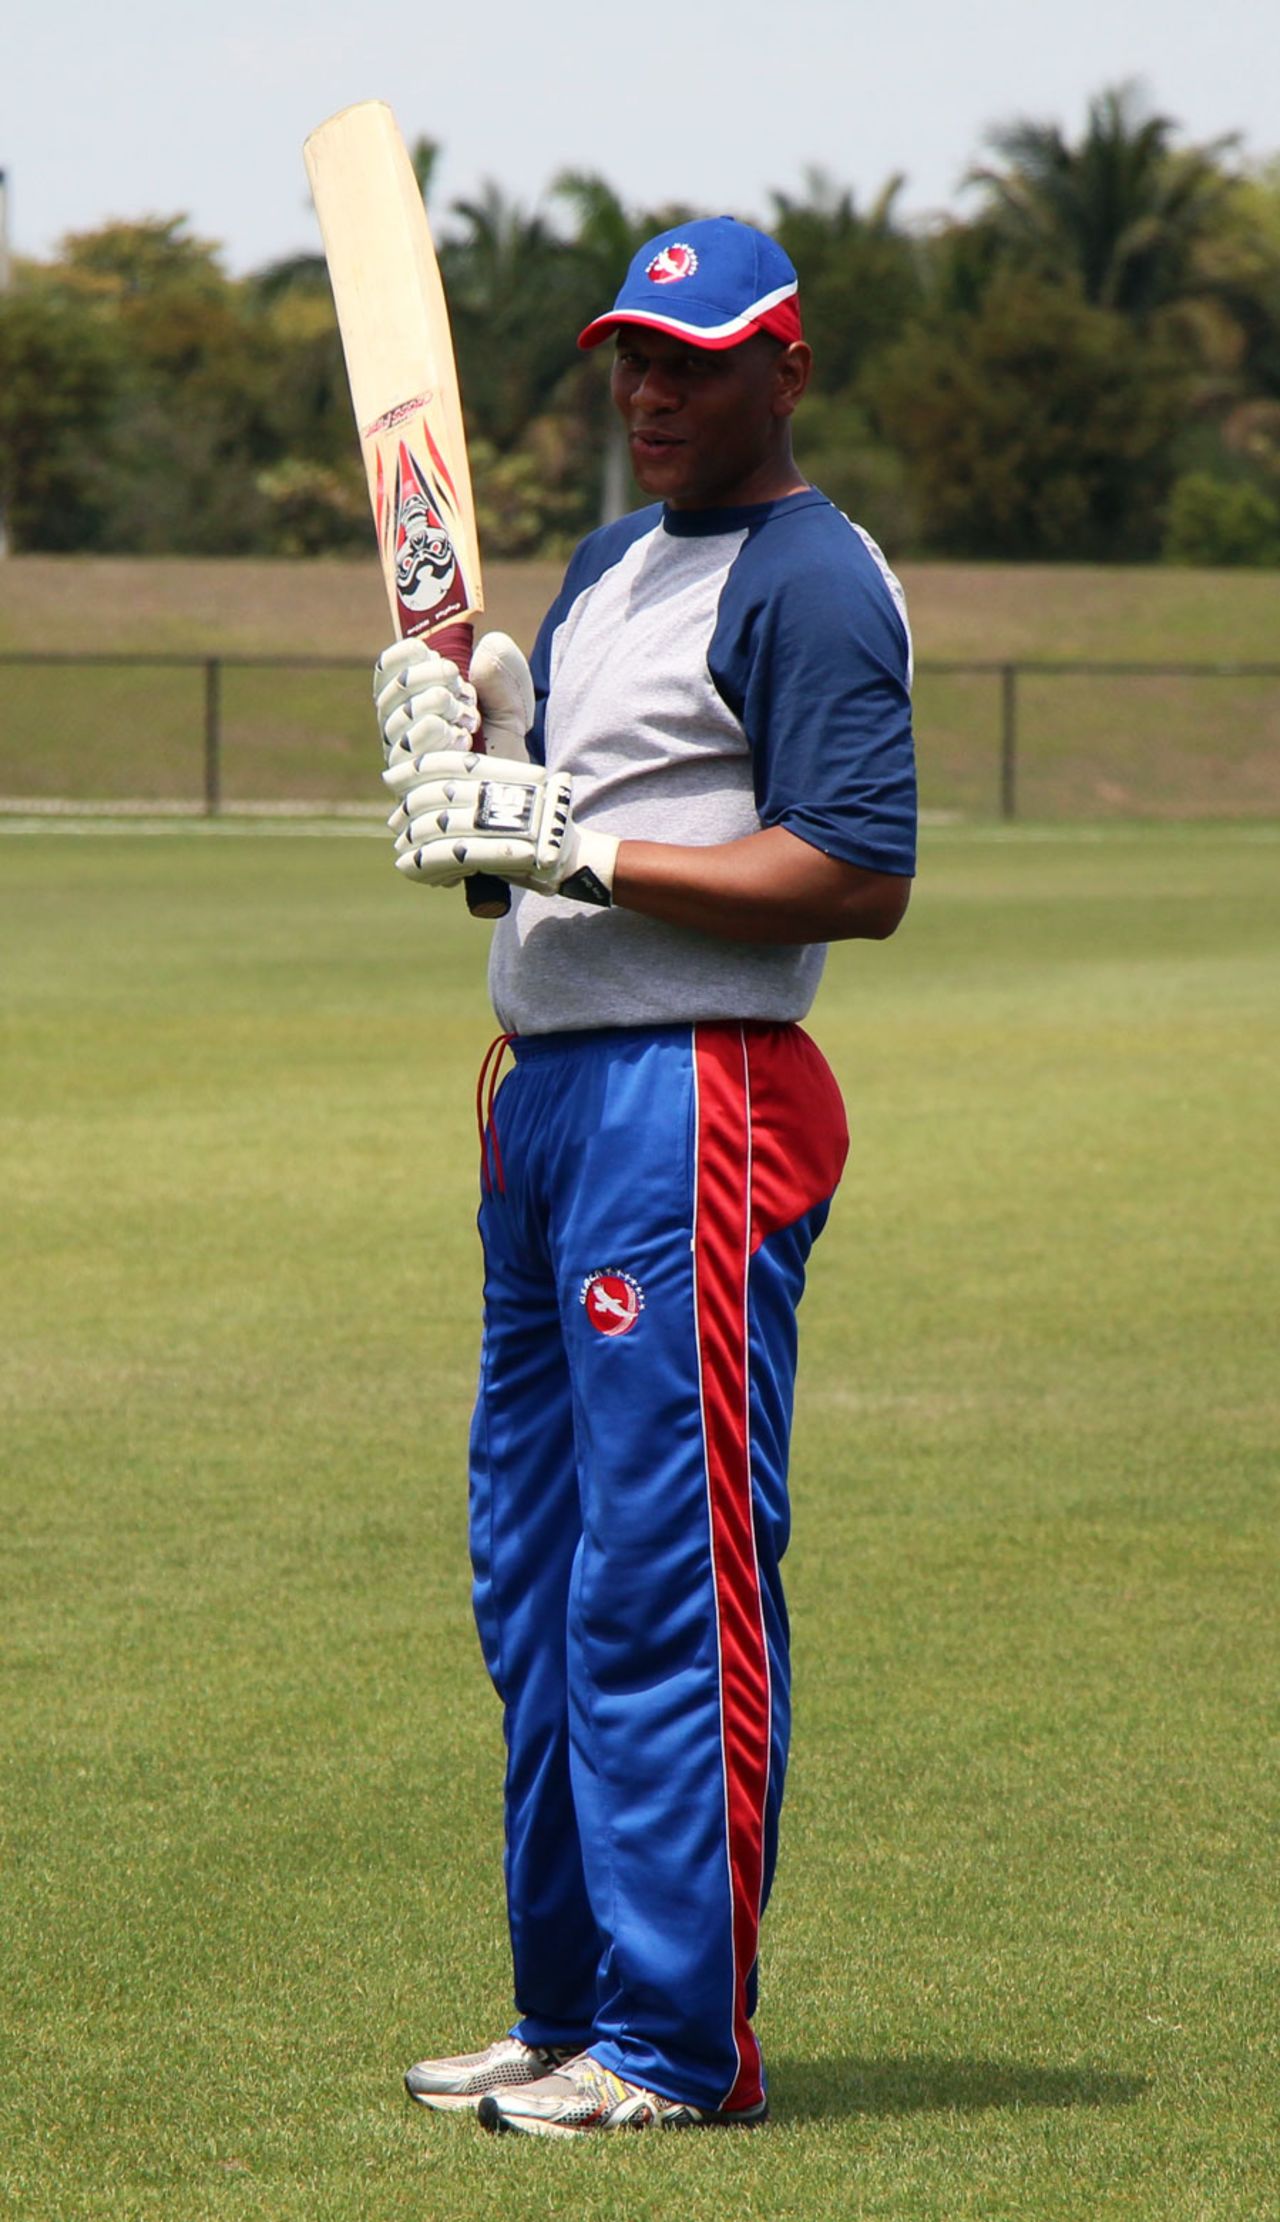 Neil McGarrell prepares to bat during a practice session, November 26, 2013